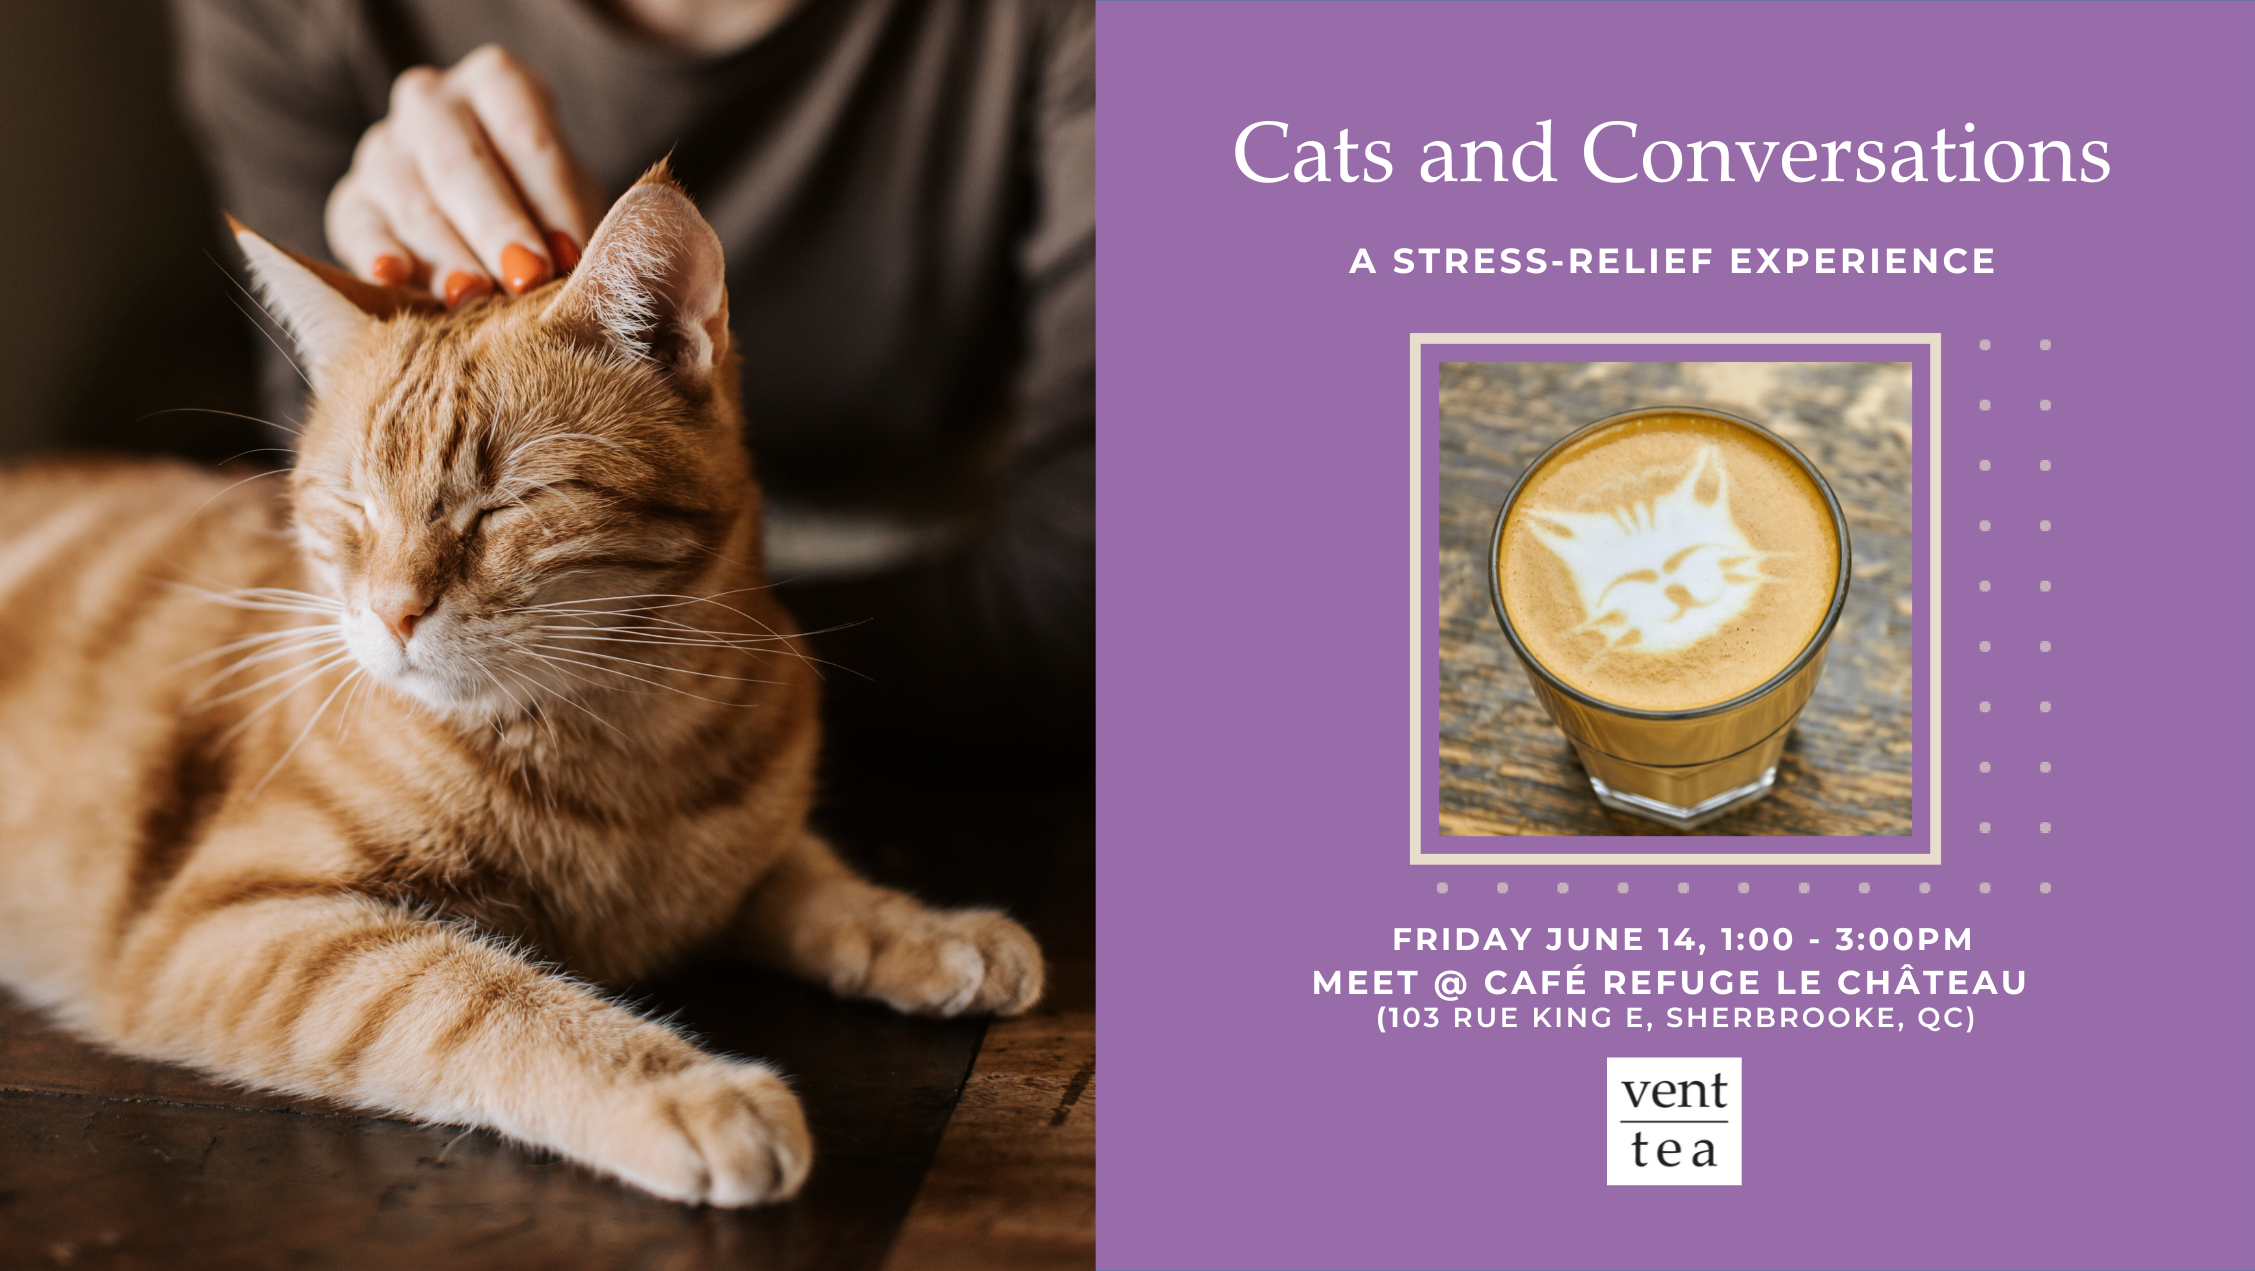 Cats and Conversations: A Stress-Relief Experience